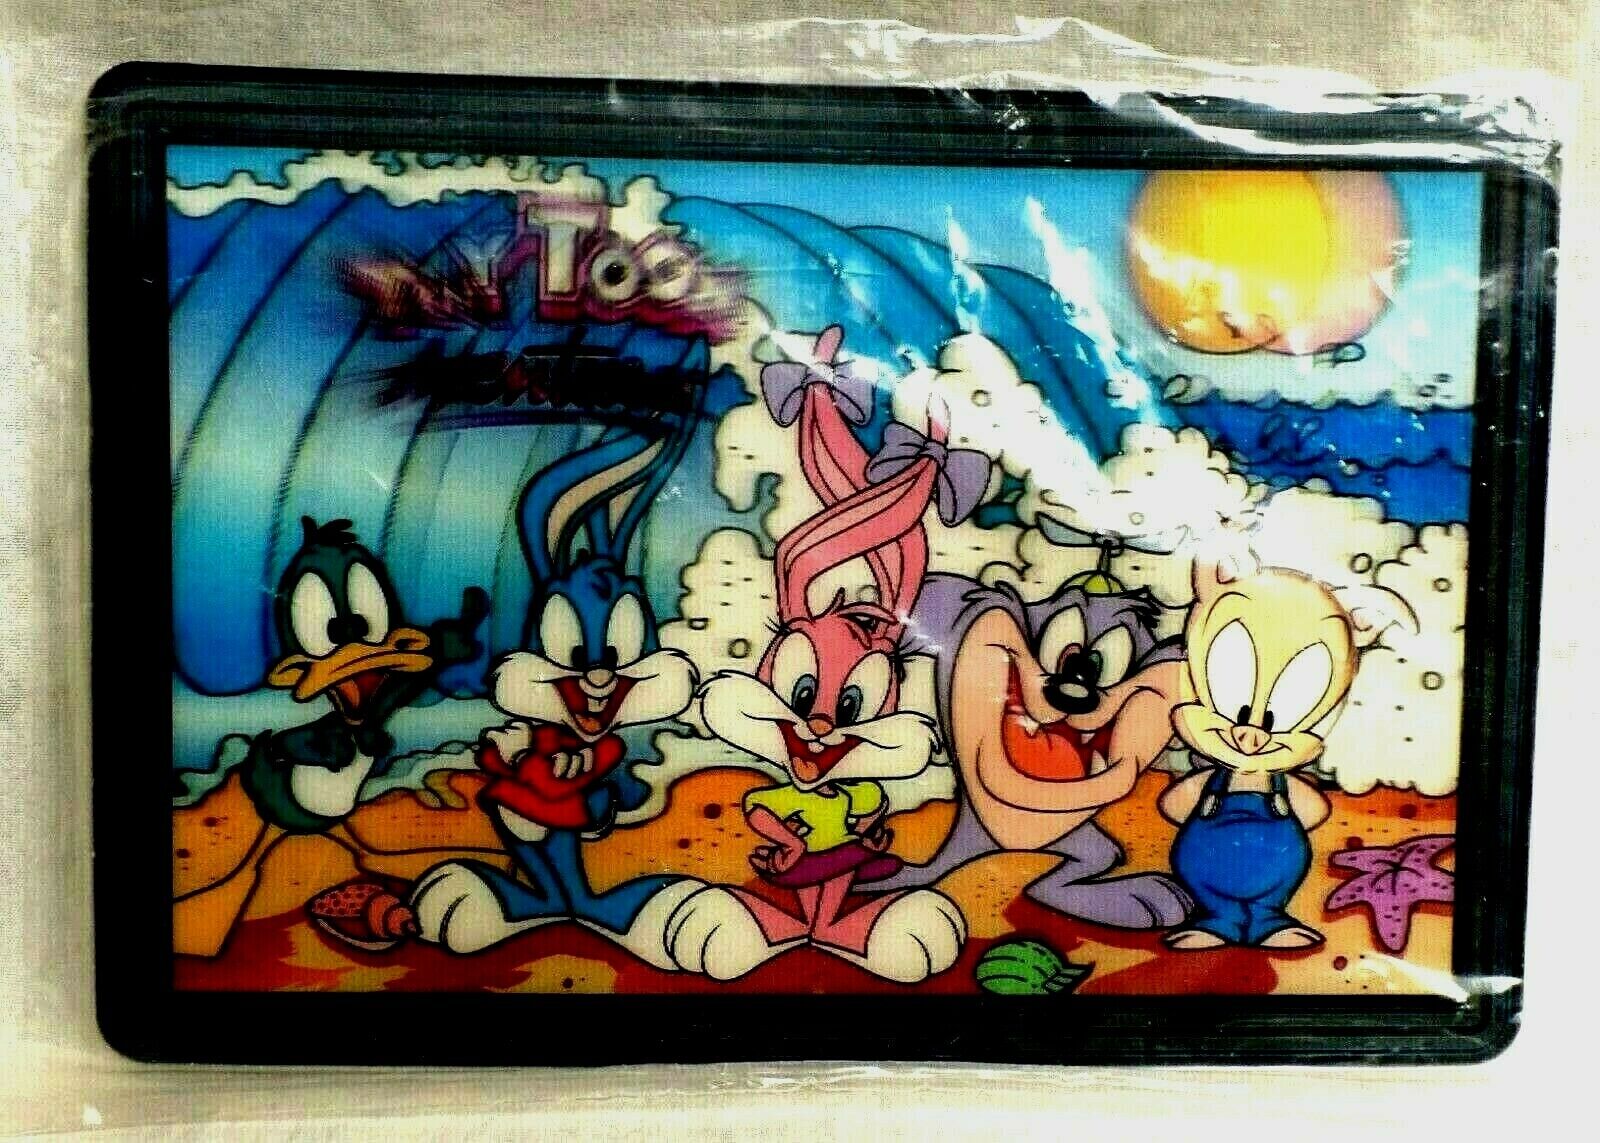 TINY TOONS photo frame 3-D wb Warner Brothers Looney Tunes MIB wendy's '98 set